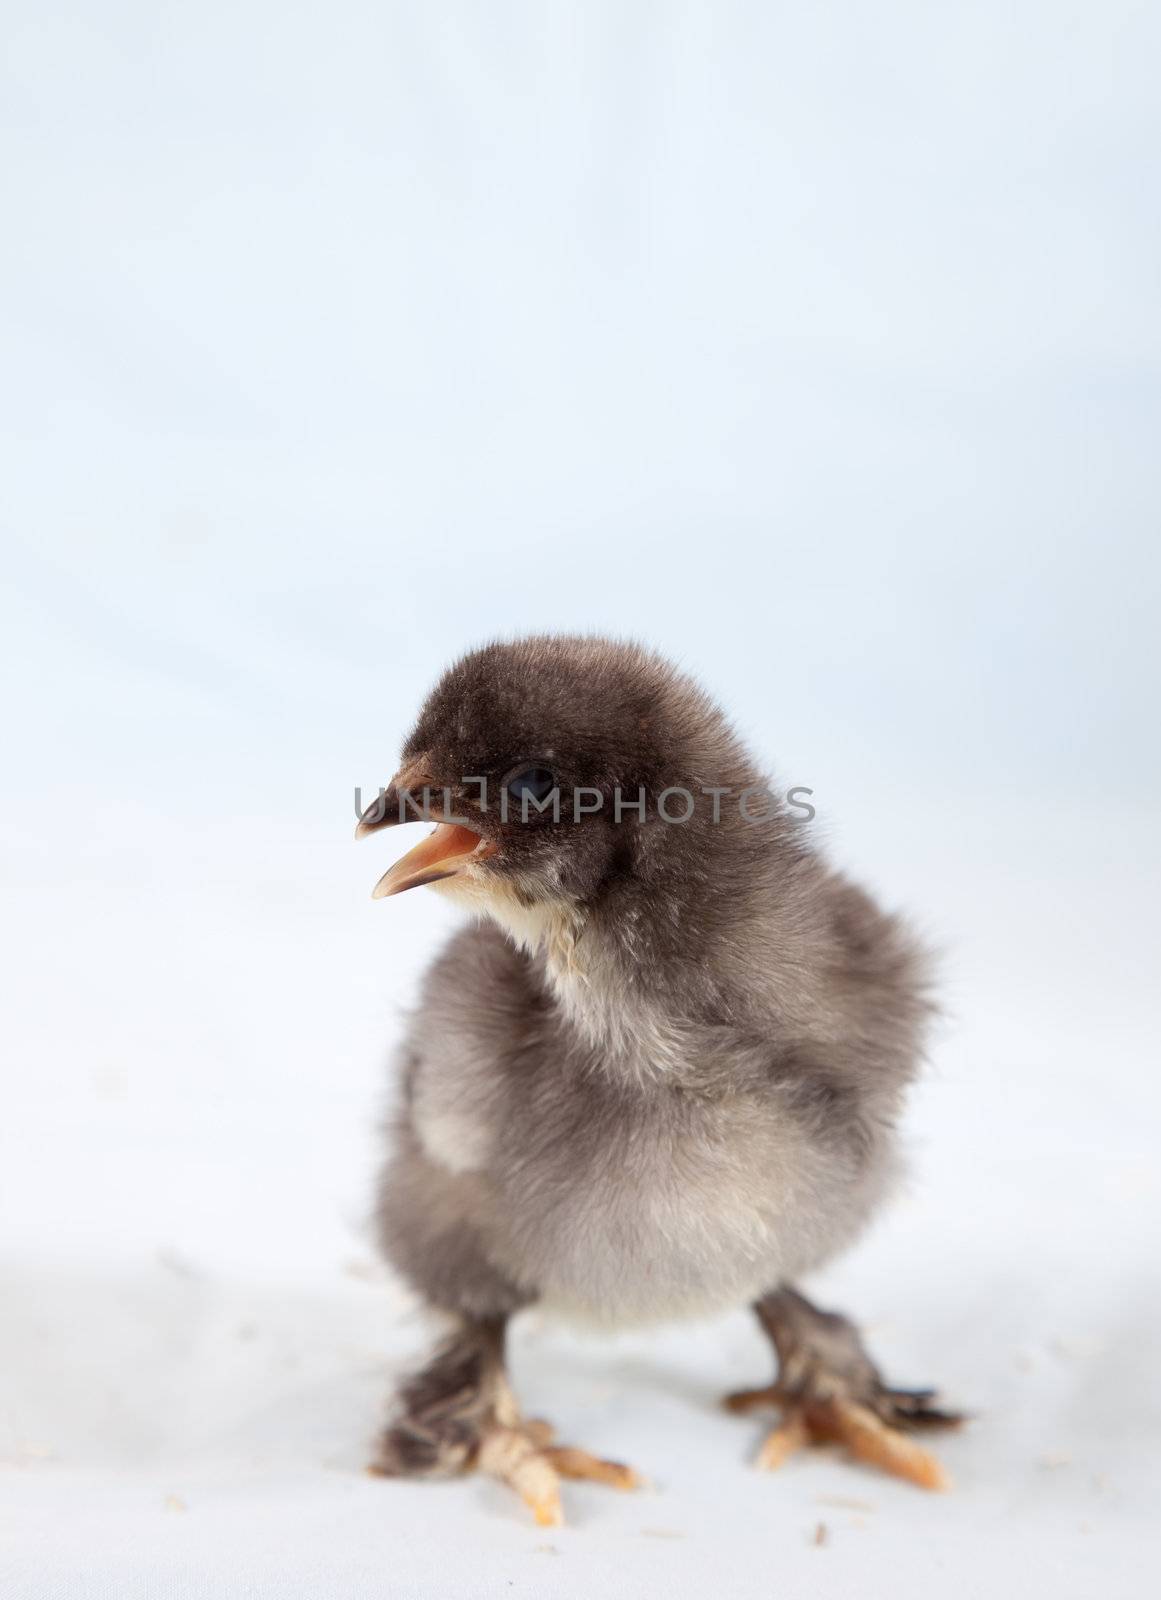 Cute little baby chicken screaming for mum